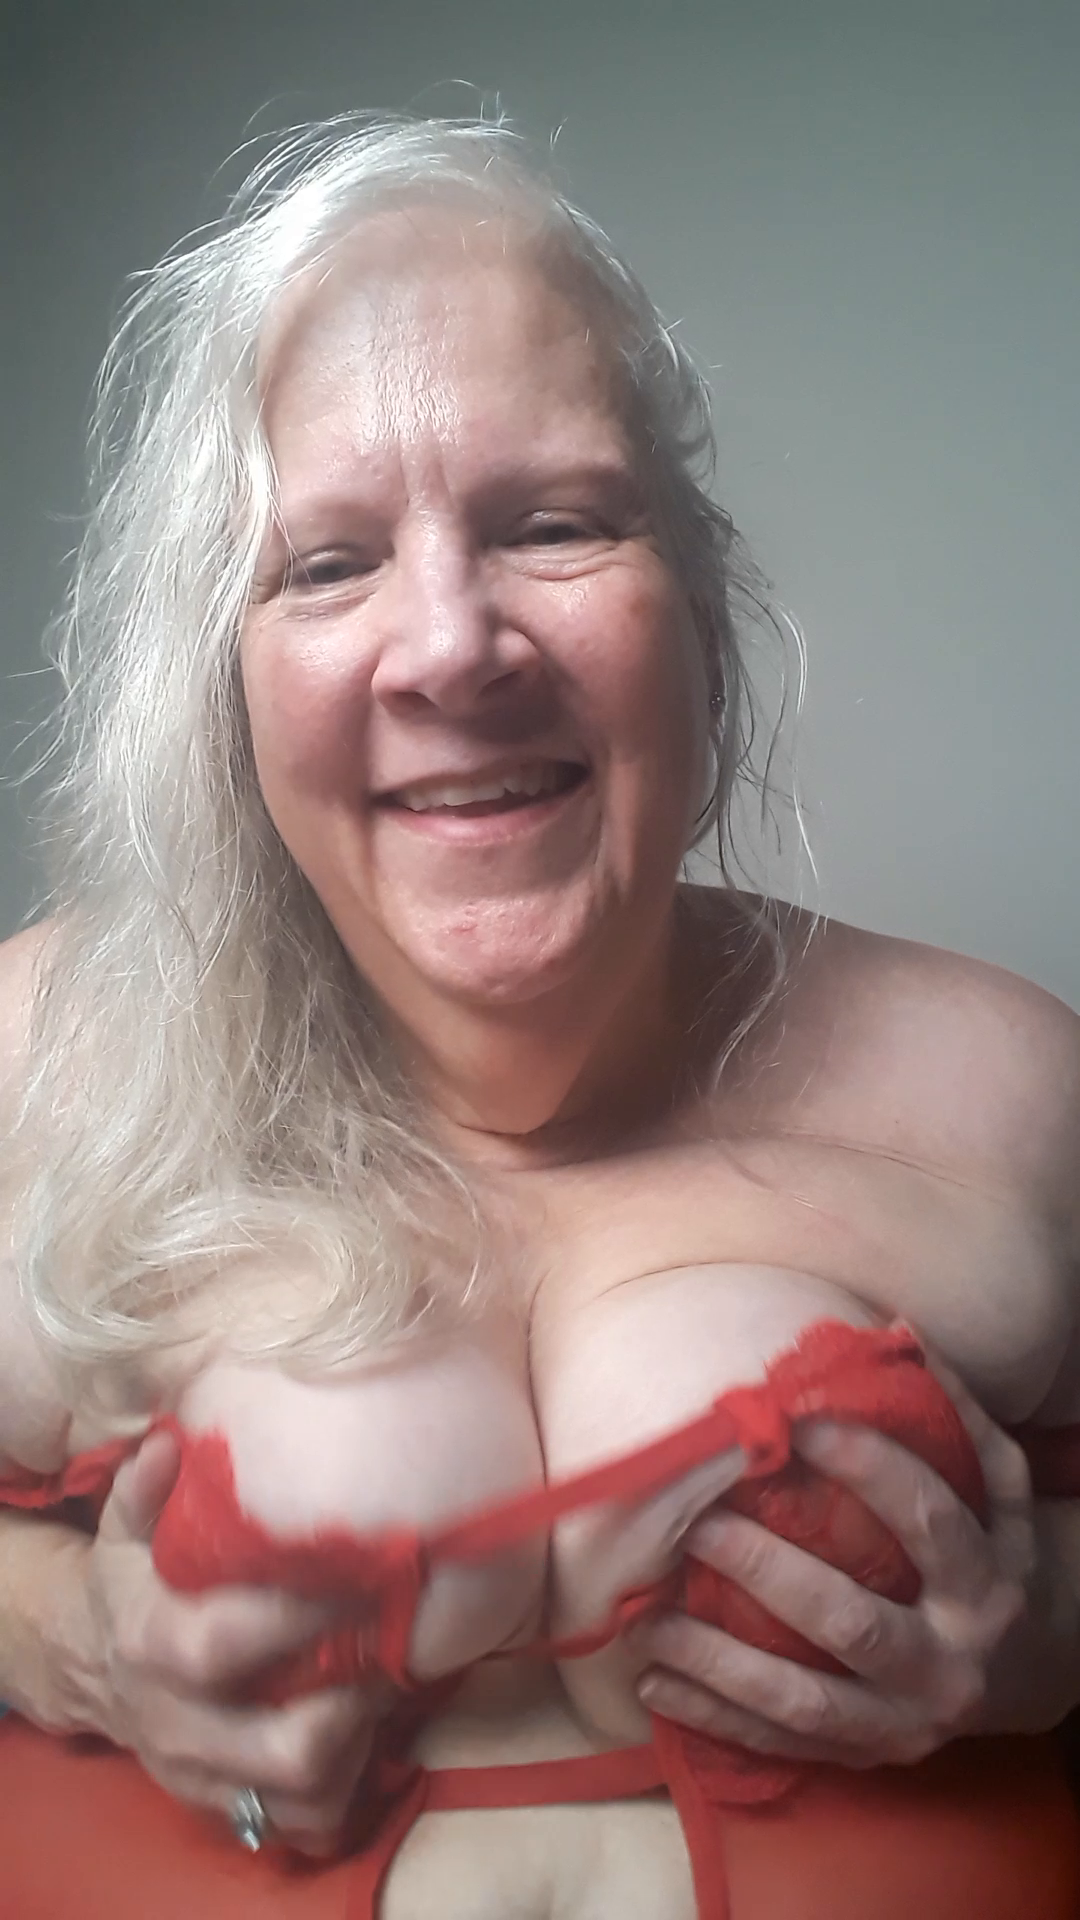 Video by Harlot O'Scara with the username @harlotoscara0713, who is a star user,  August 20, 2020 at 2:19 AM and the text says 'Cum have some fun with Harlot! great low August pricing. New free content daily'